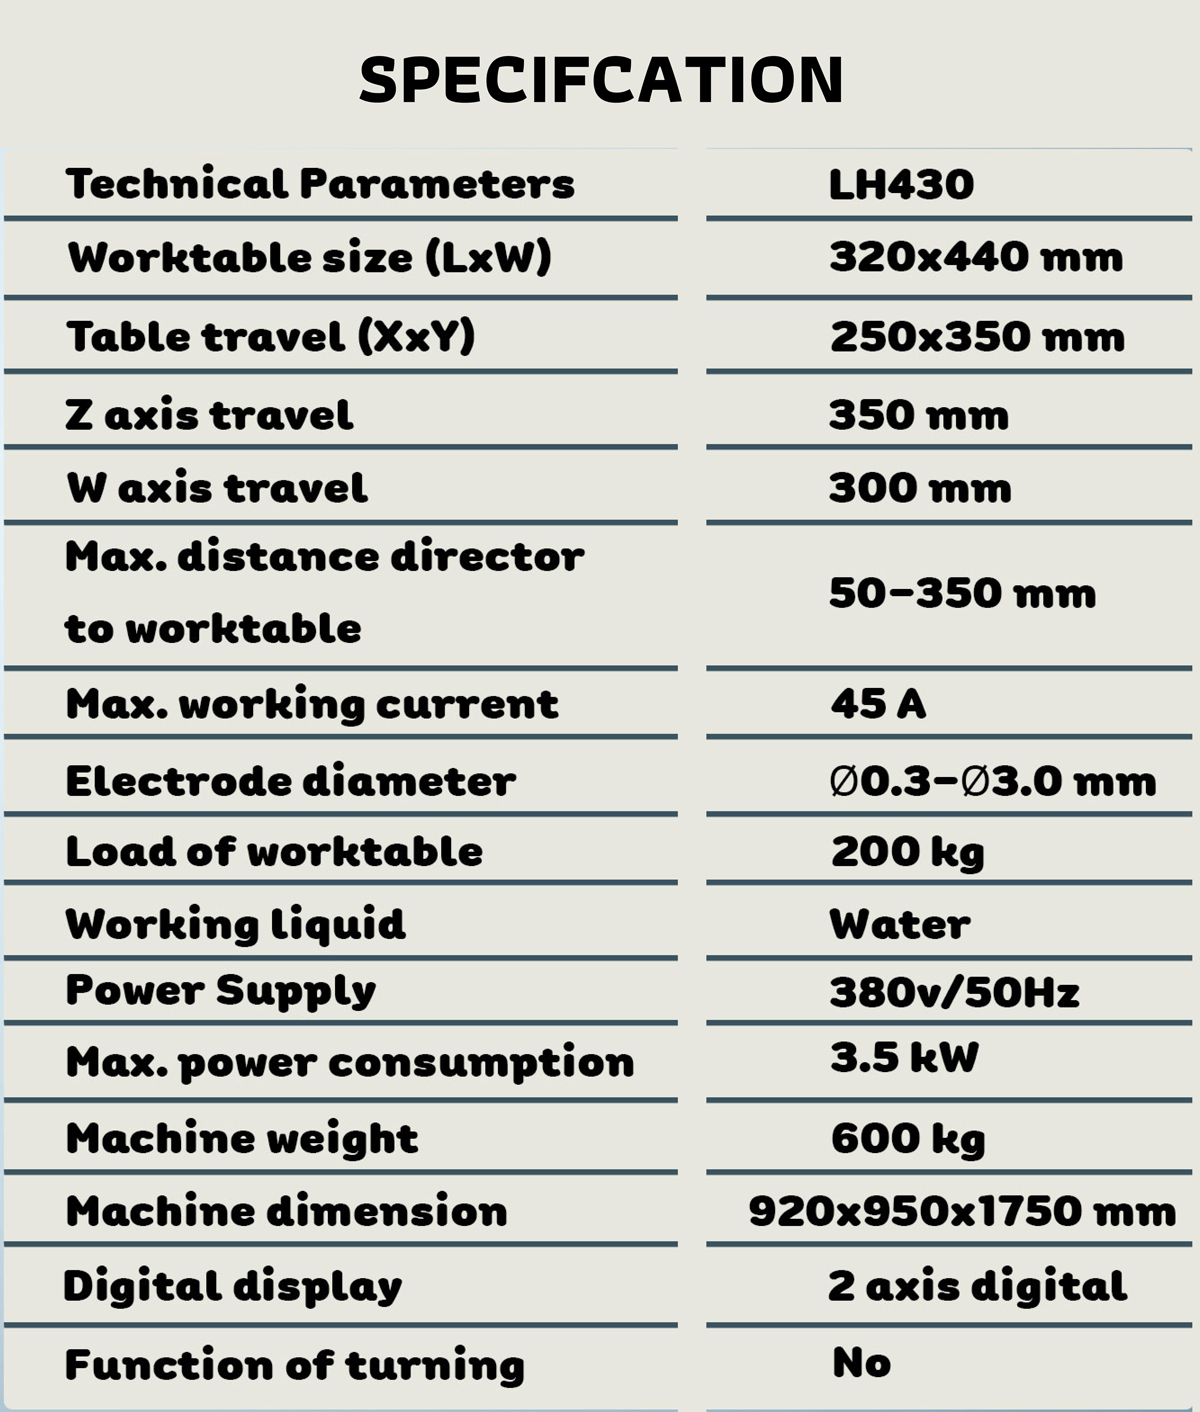 Technical parameters SUPPER DRILL EDM (LH430)